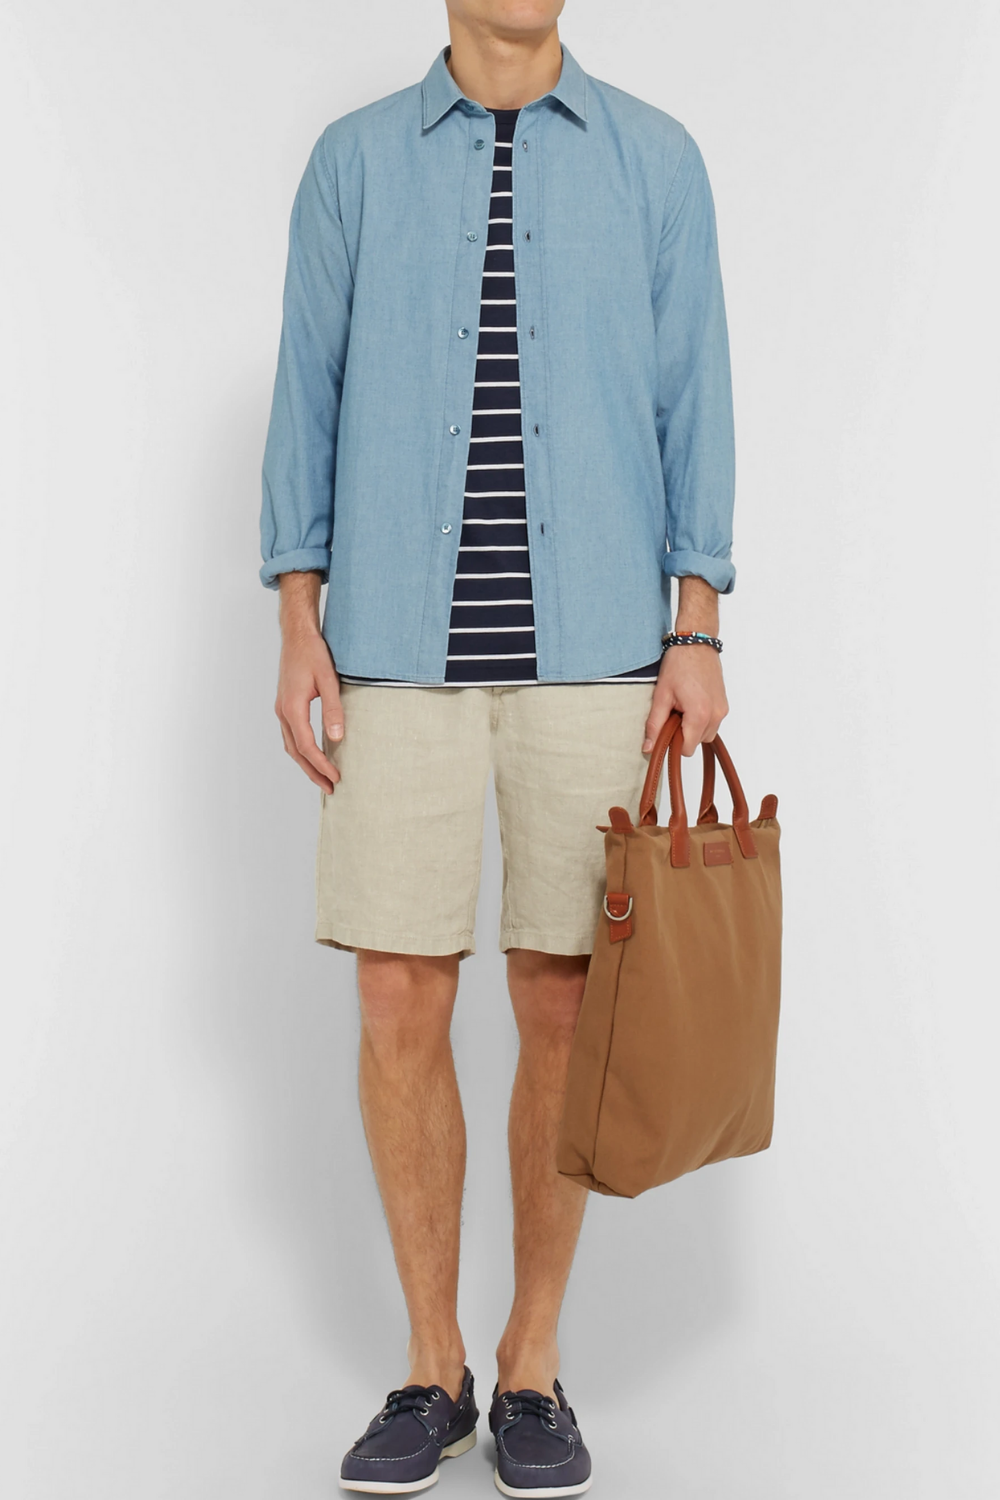 boat Shoes to Wear with Shorts